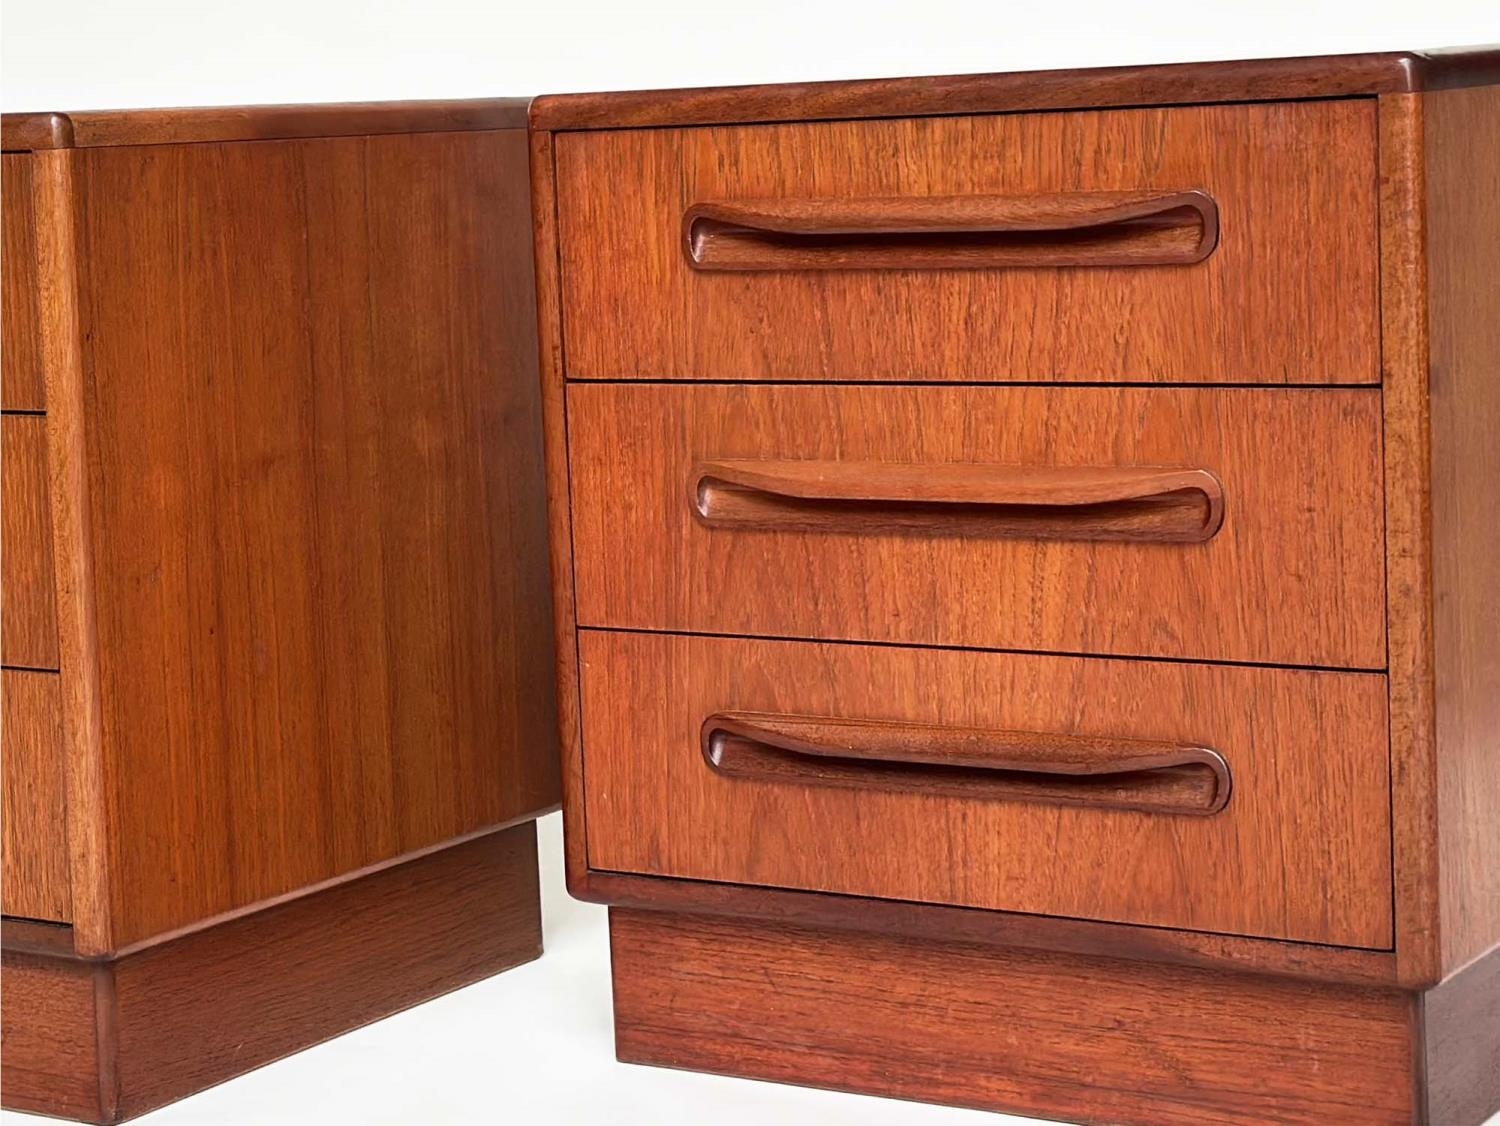 G PLAN SIDE CHESTS, a pair, vintage 1970s teak, each with three drawers, reverse labels dated - Image 4 of 9